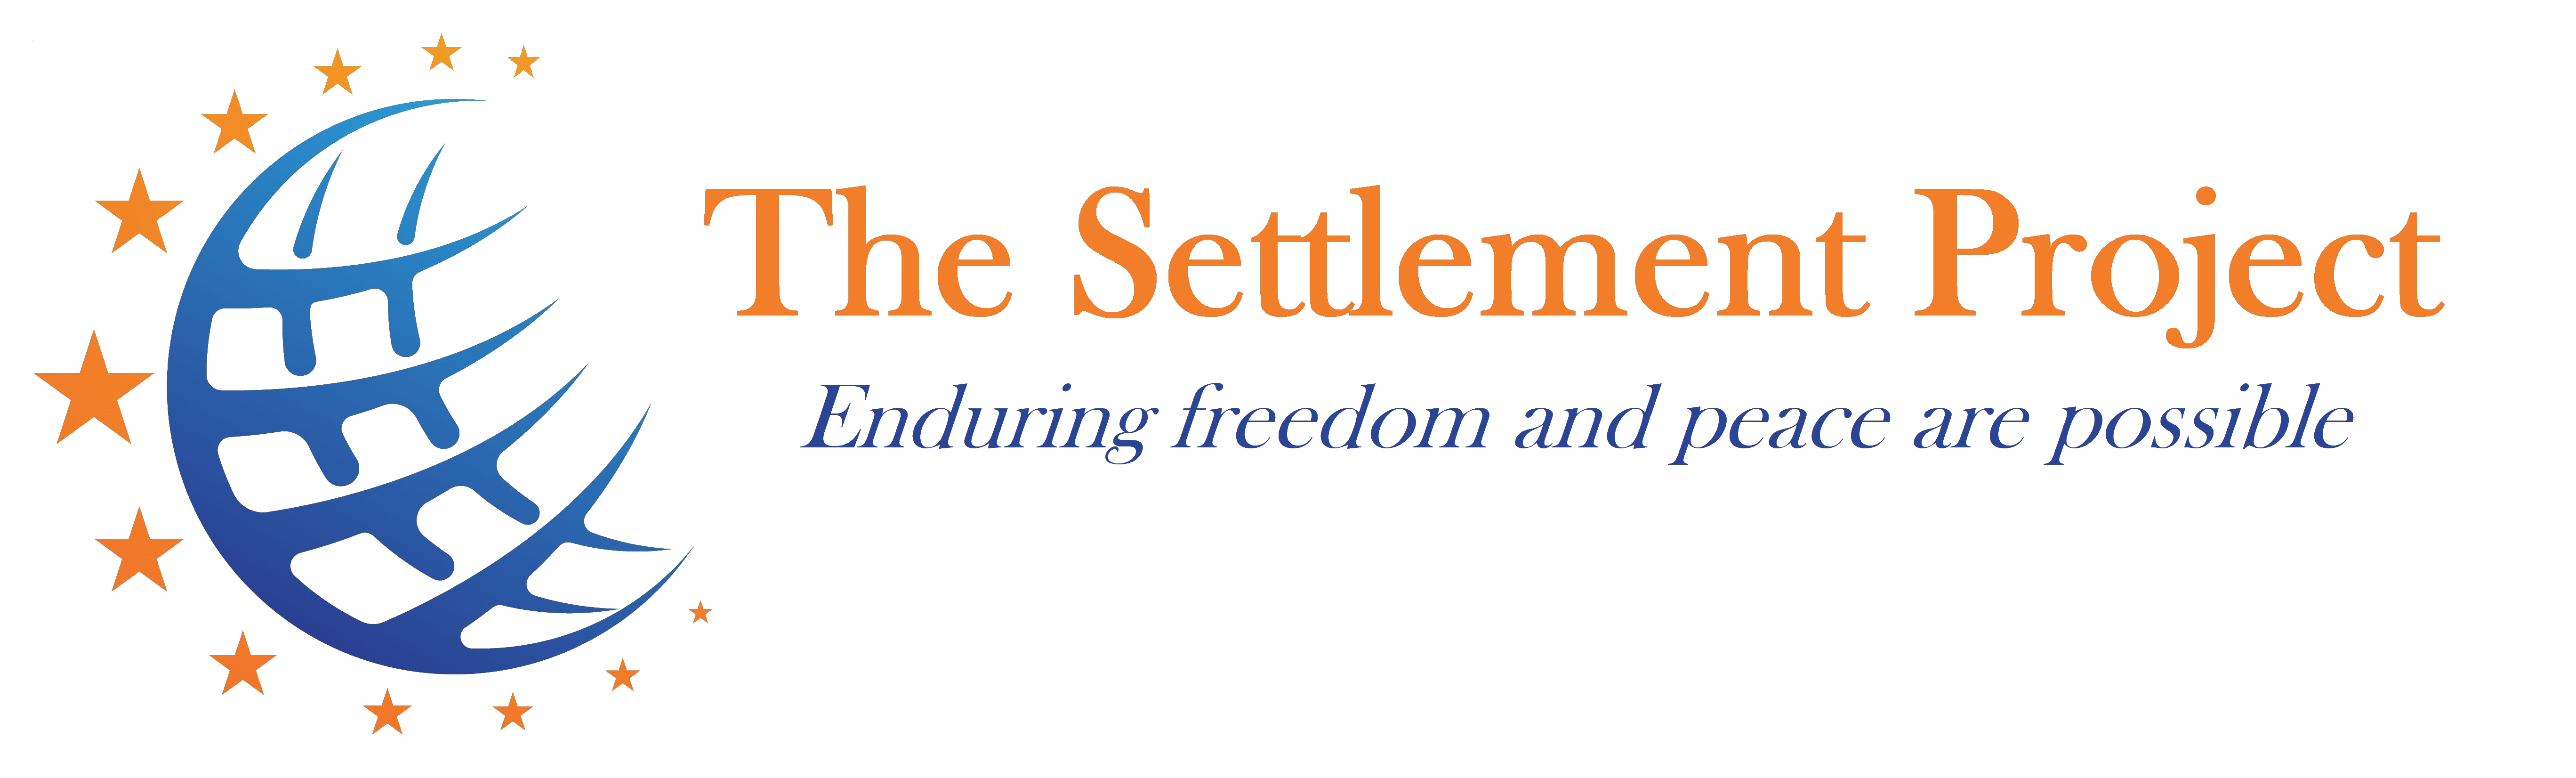 The Settlement Project